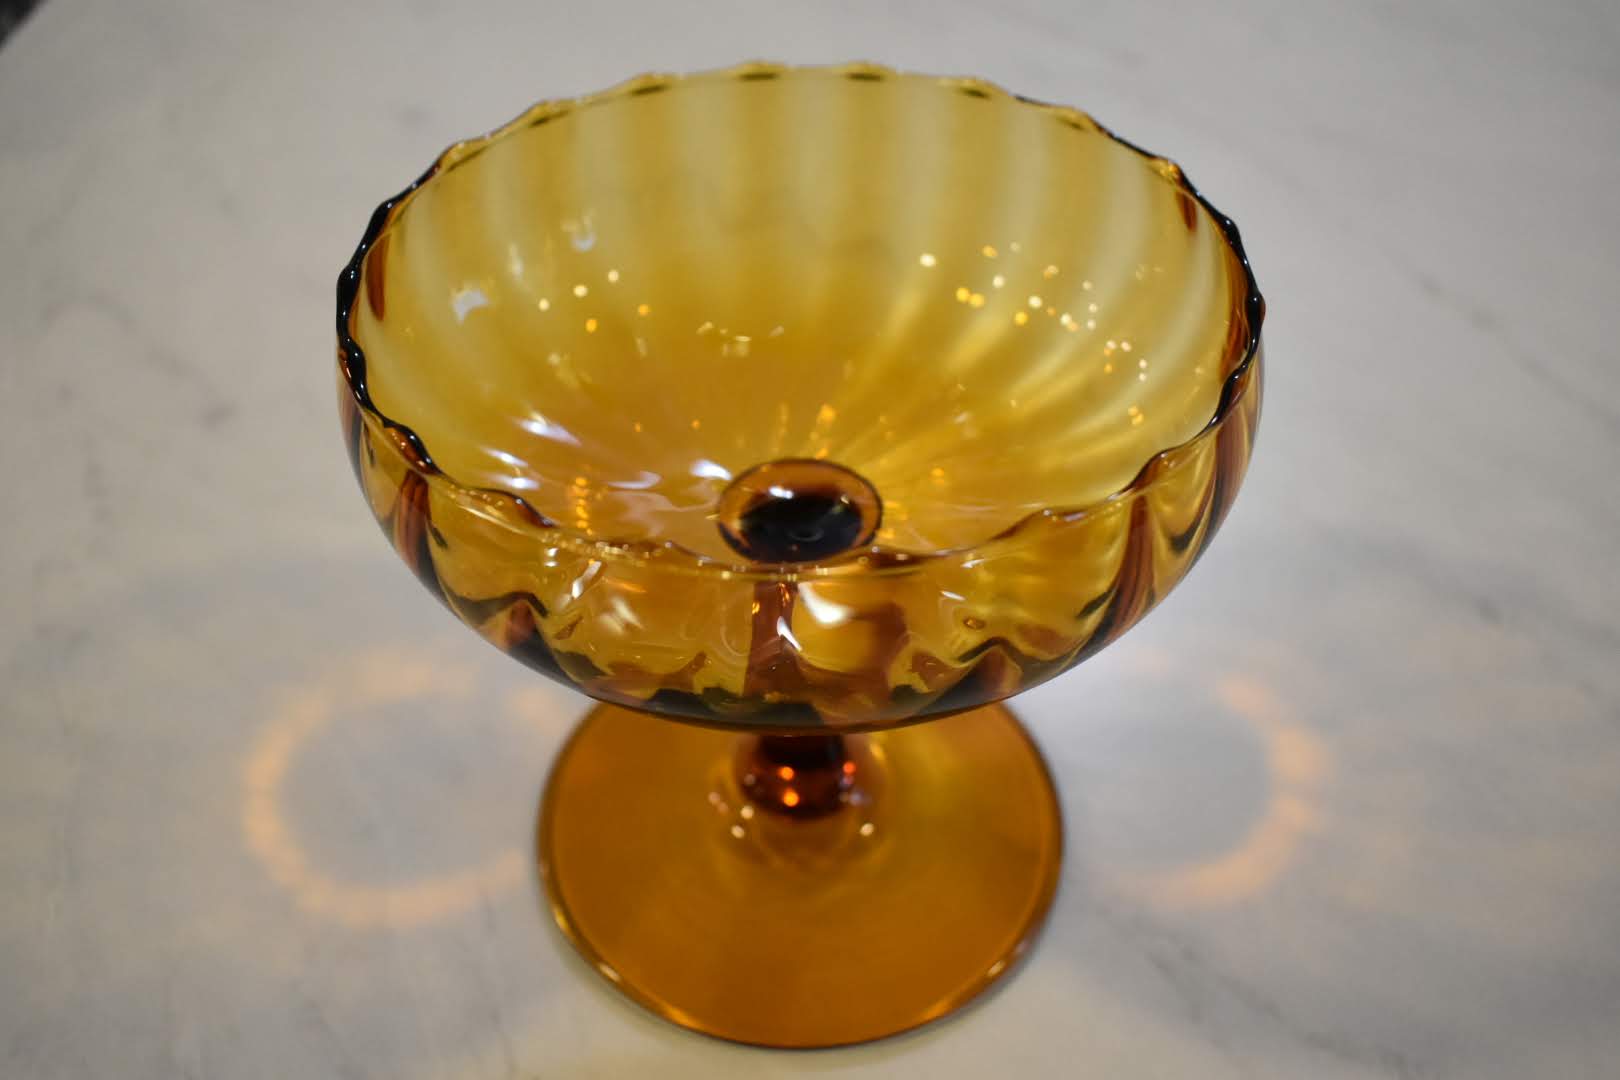 Amber Crystal Glass - Golden Yellow Color Candy Bowl - Table Home Decor